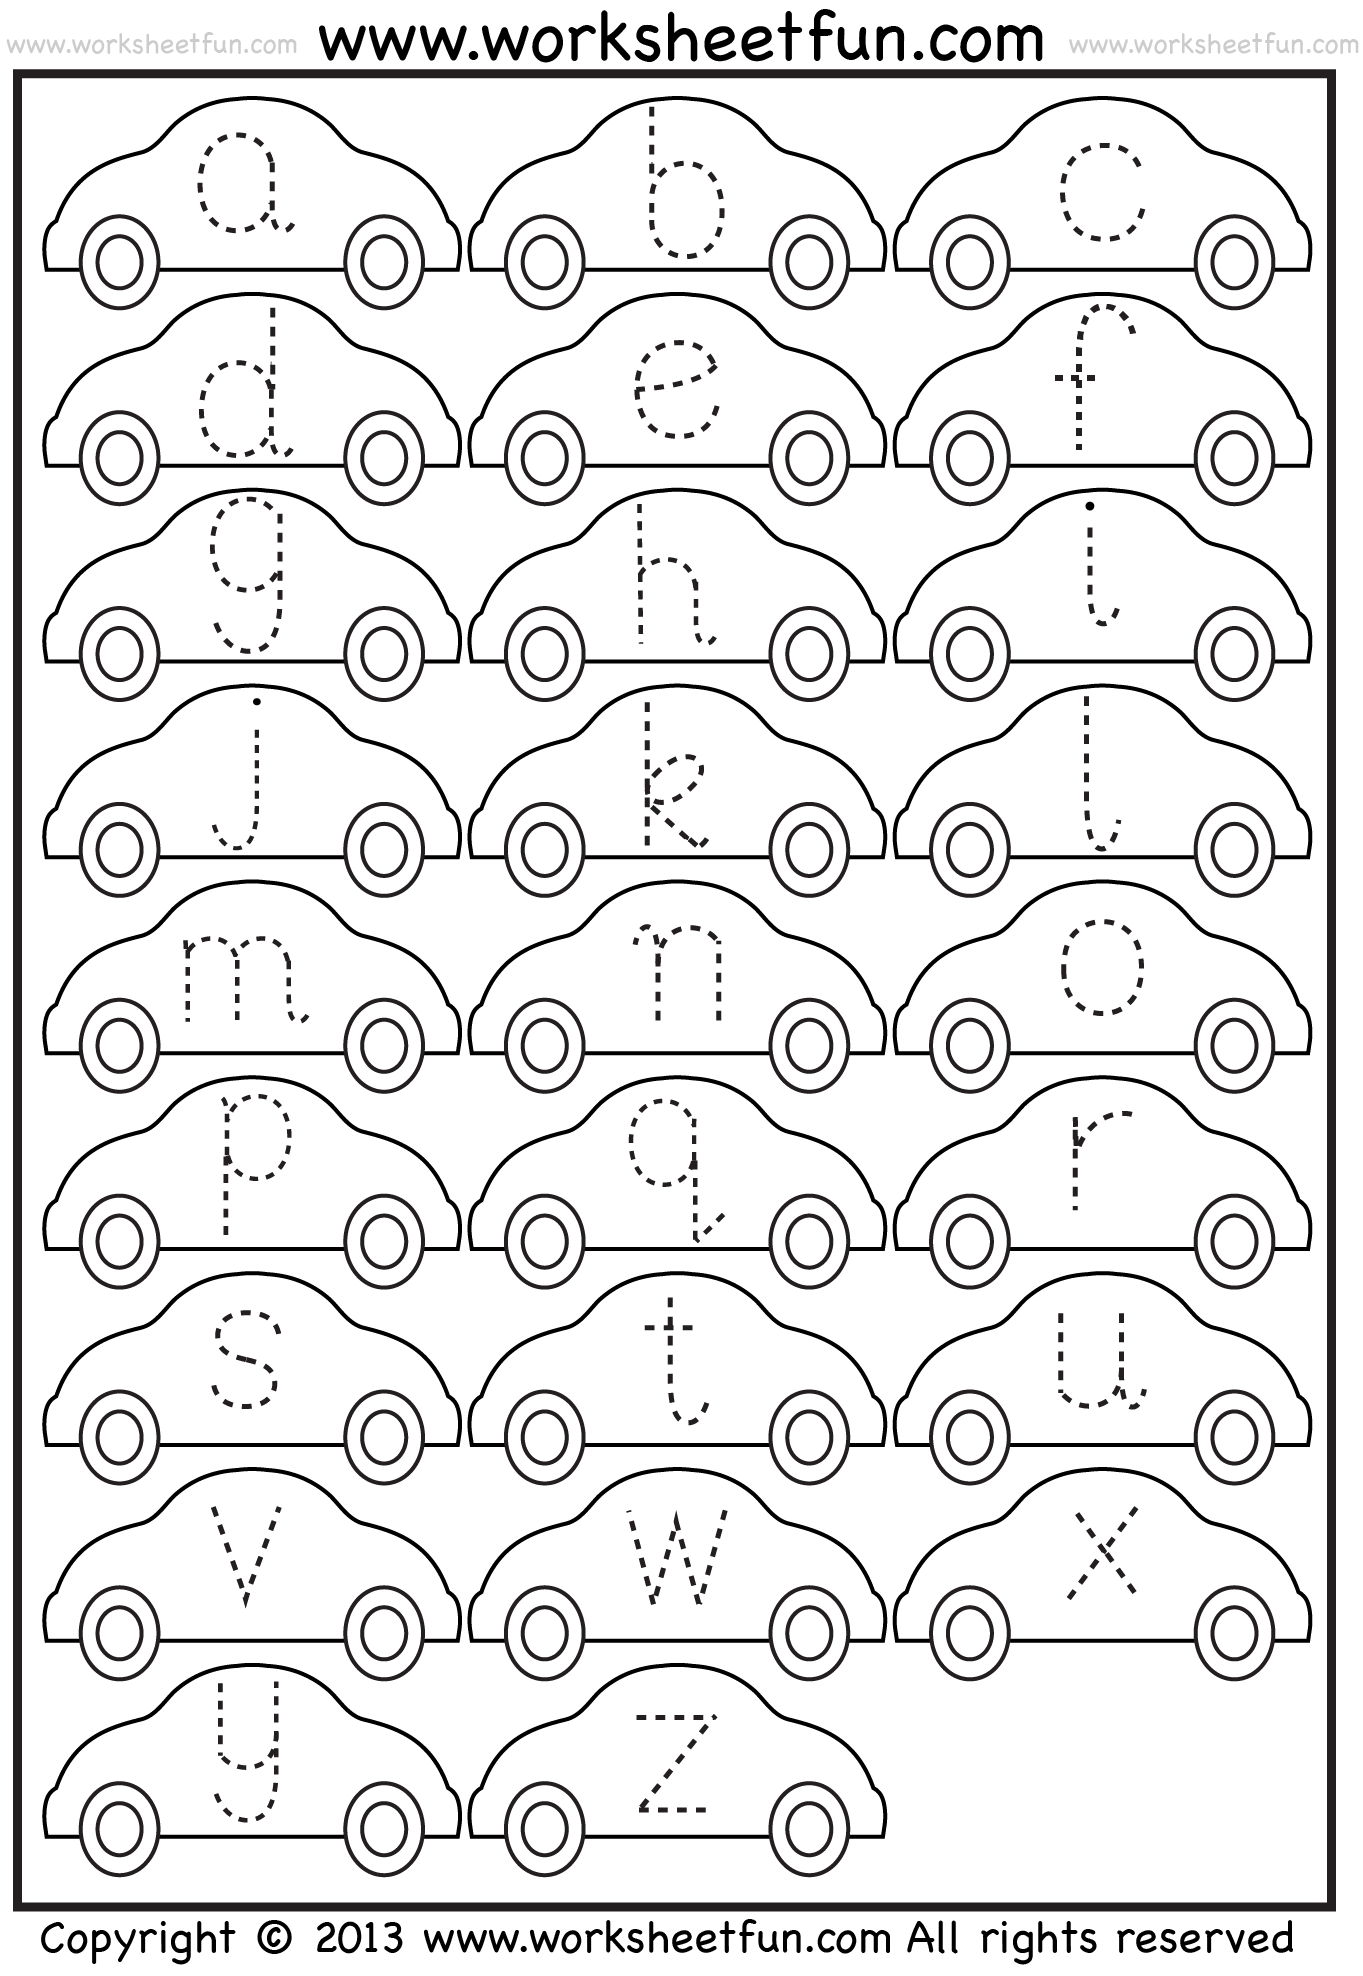 small-letter-tracing-lowercase-worksheet-car-free-printable